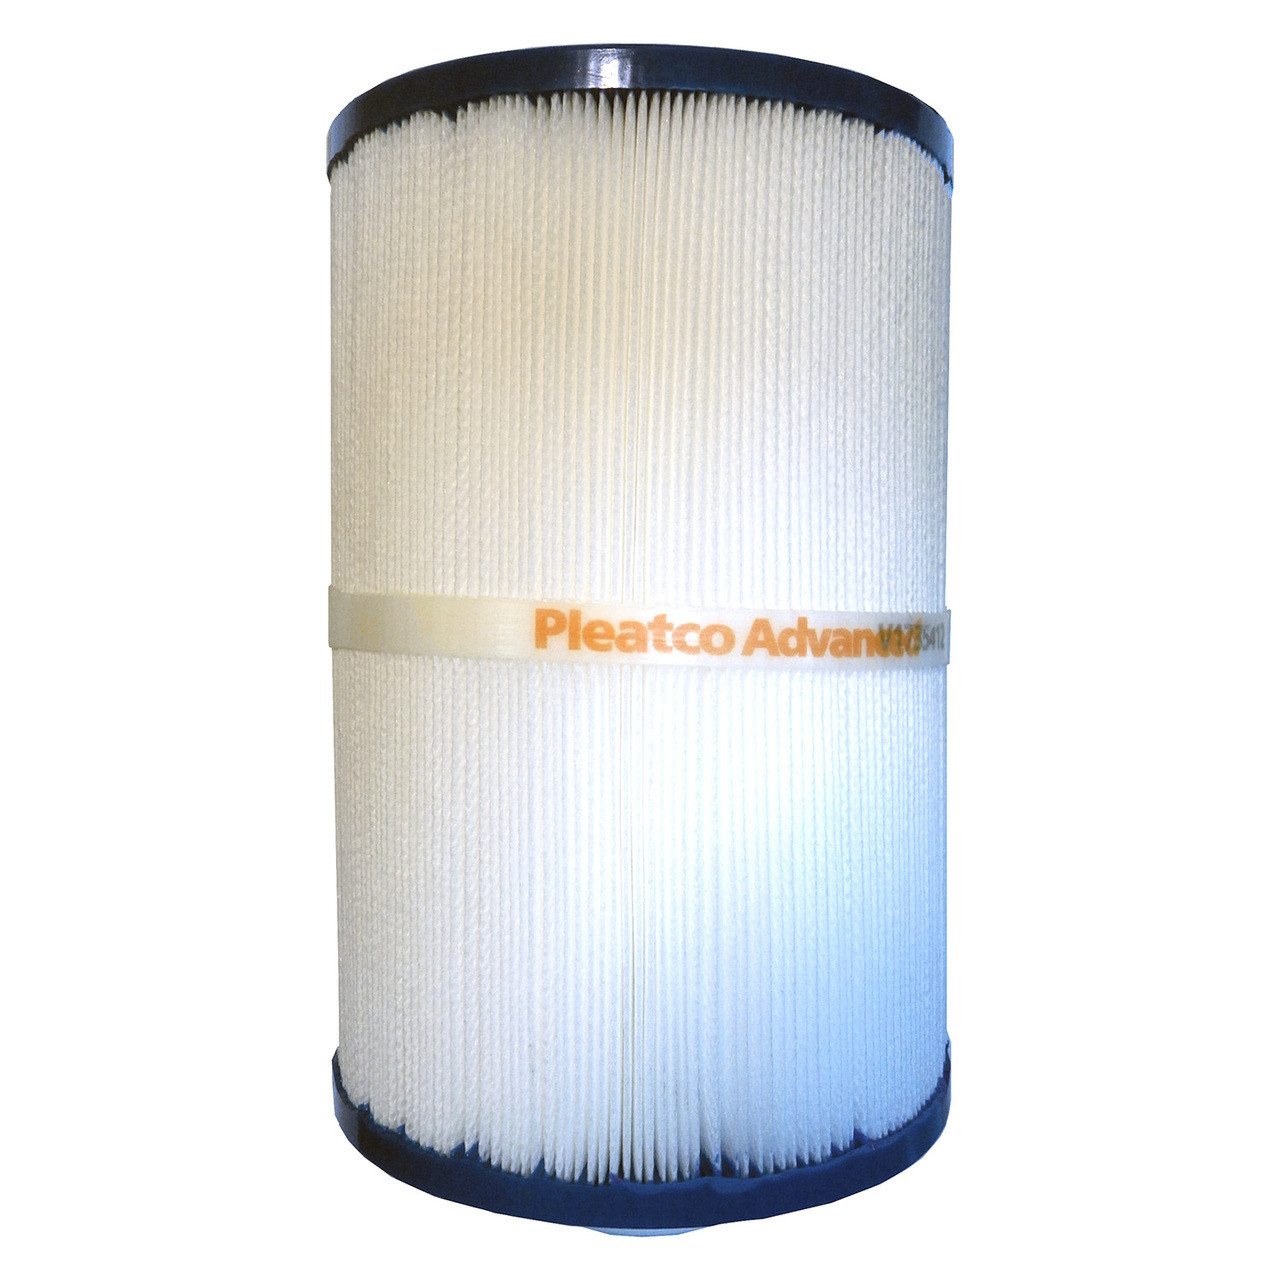 Getaway Spas-Outer Filter for Eco Pur Charge System-X268550-PMA-R5